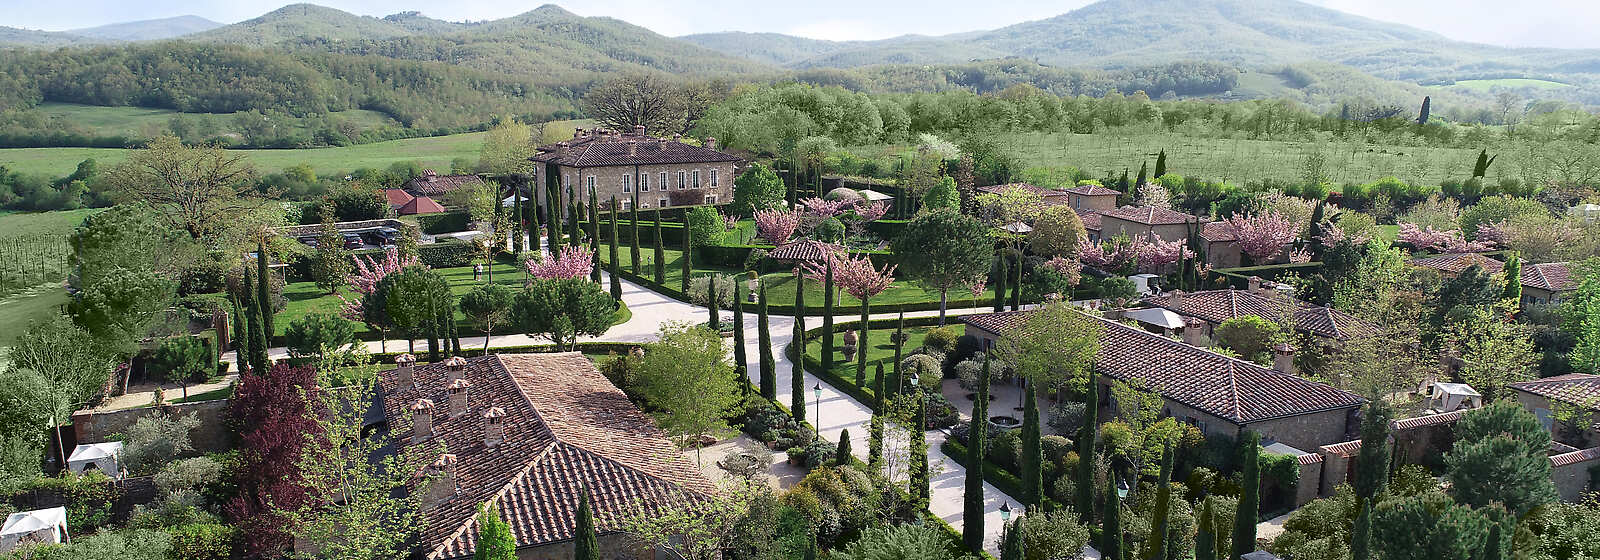 Luxury meets ultimate seclusion in this 200-acre boutique hotel & spa with a farm-to-plate philoophy